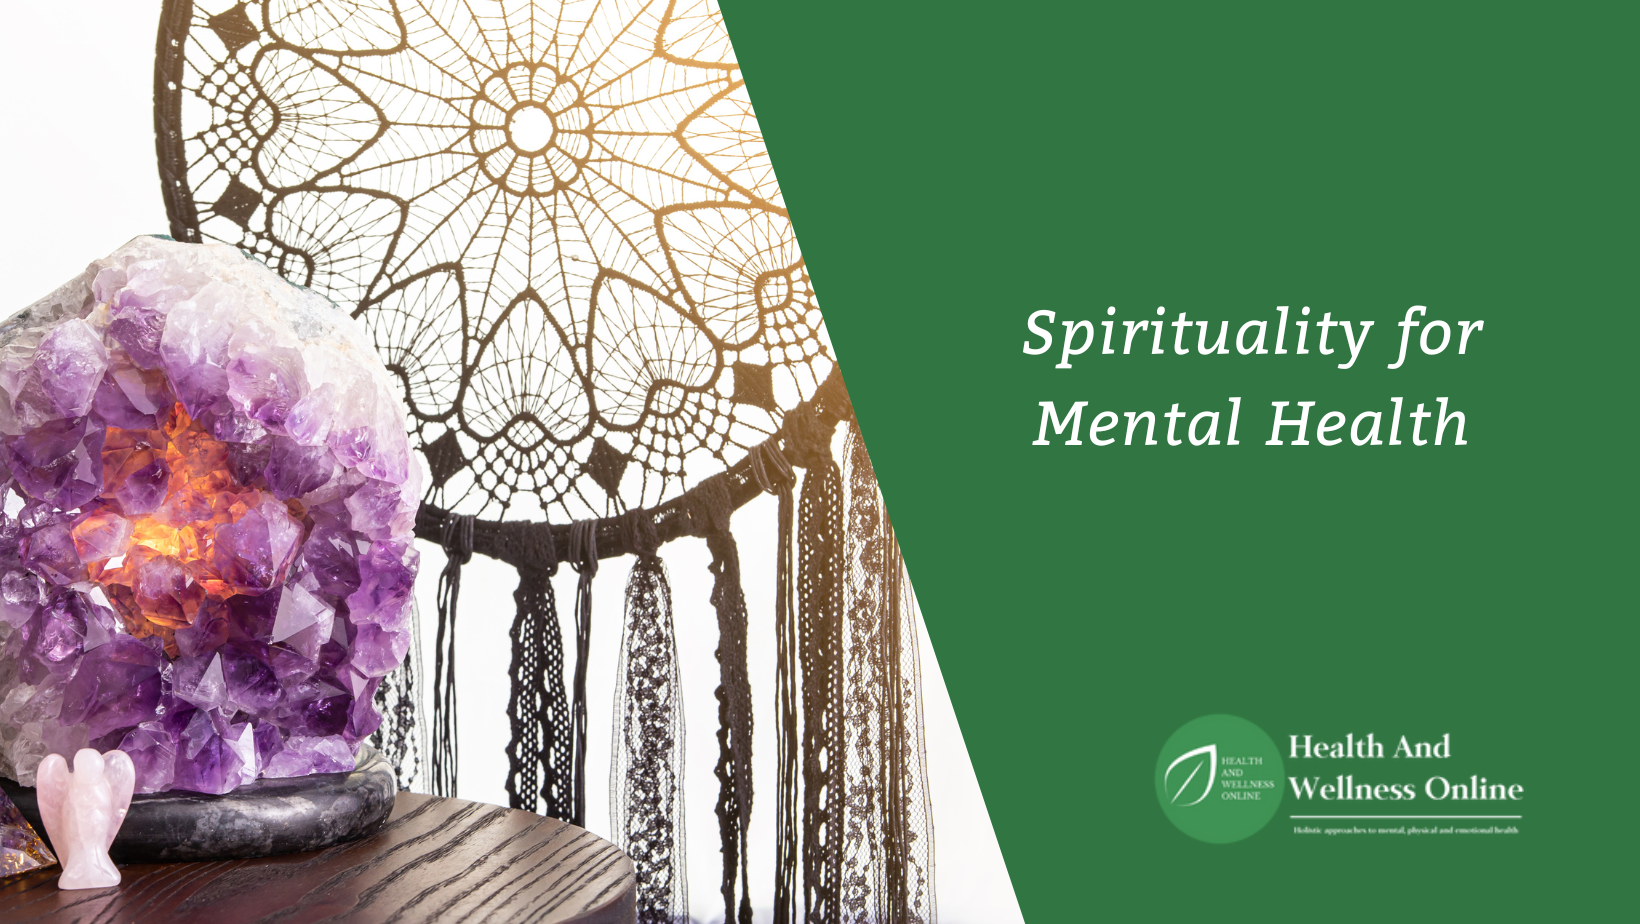 Spirituality for Mental Health is a 3 CE CH class provided by Health and Wellness Online.